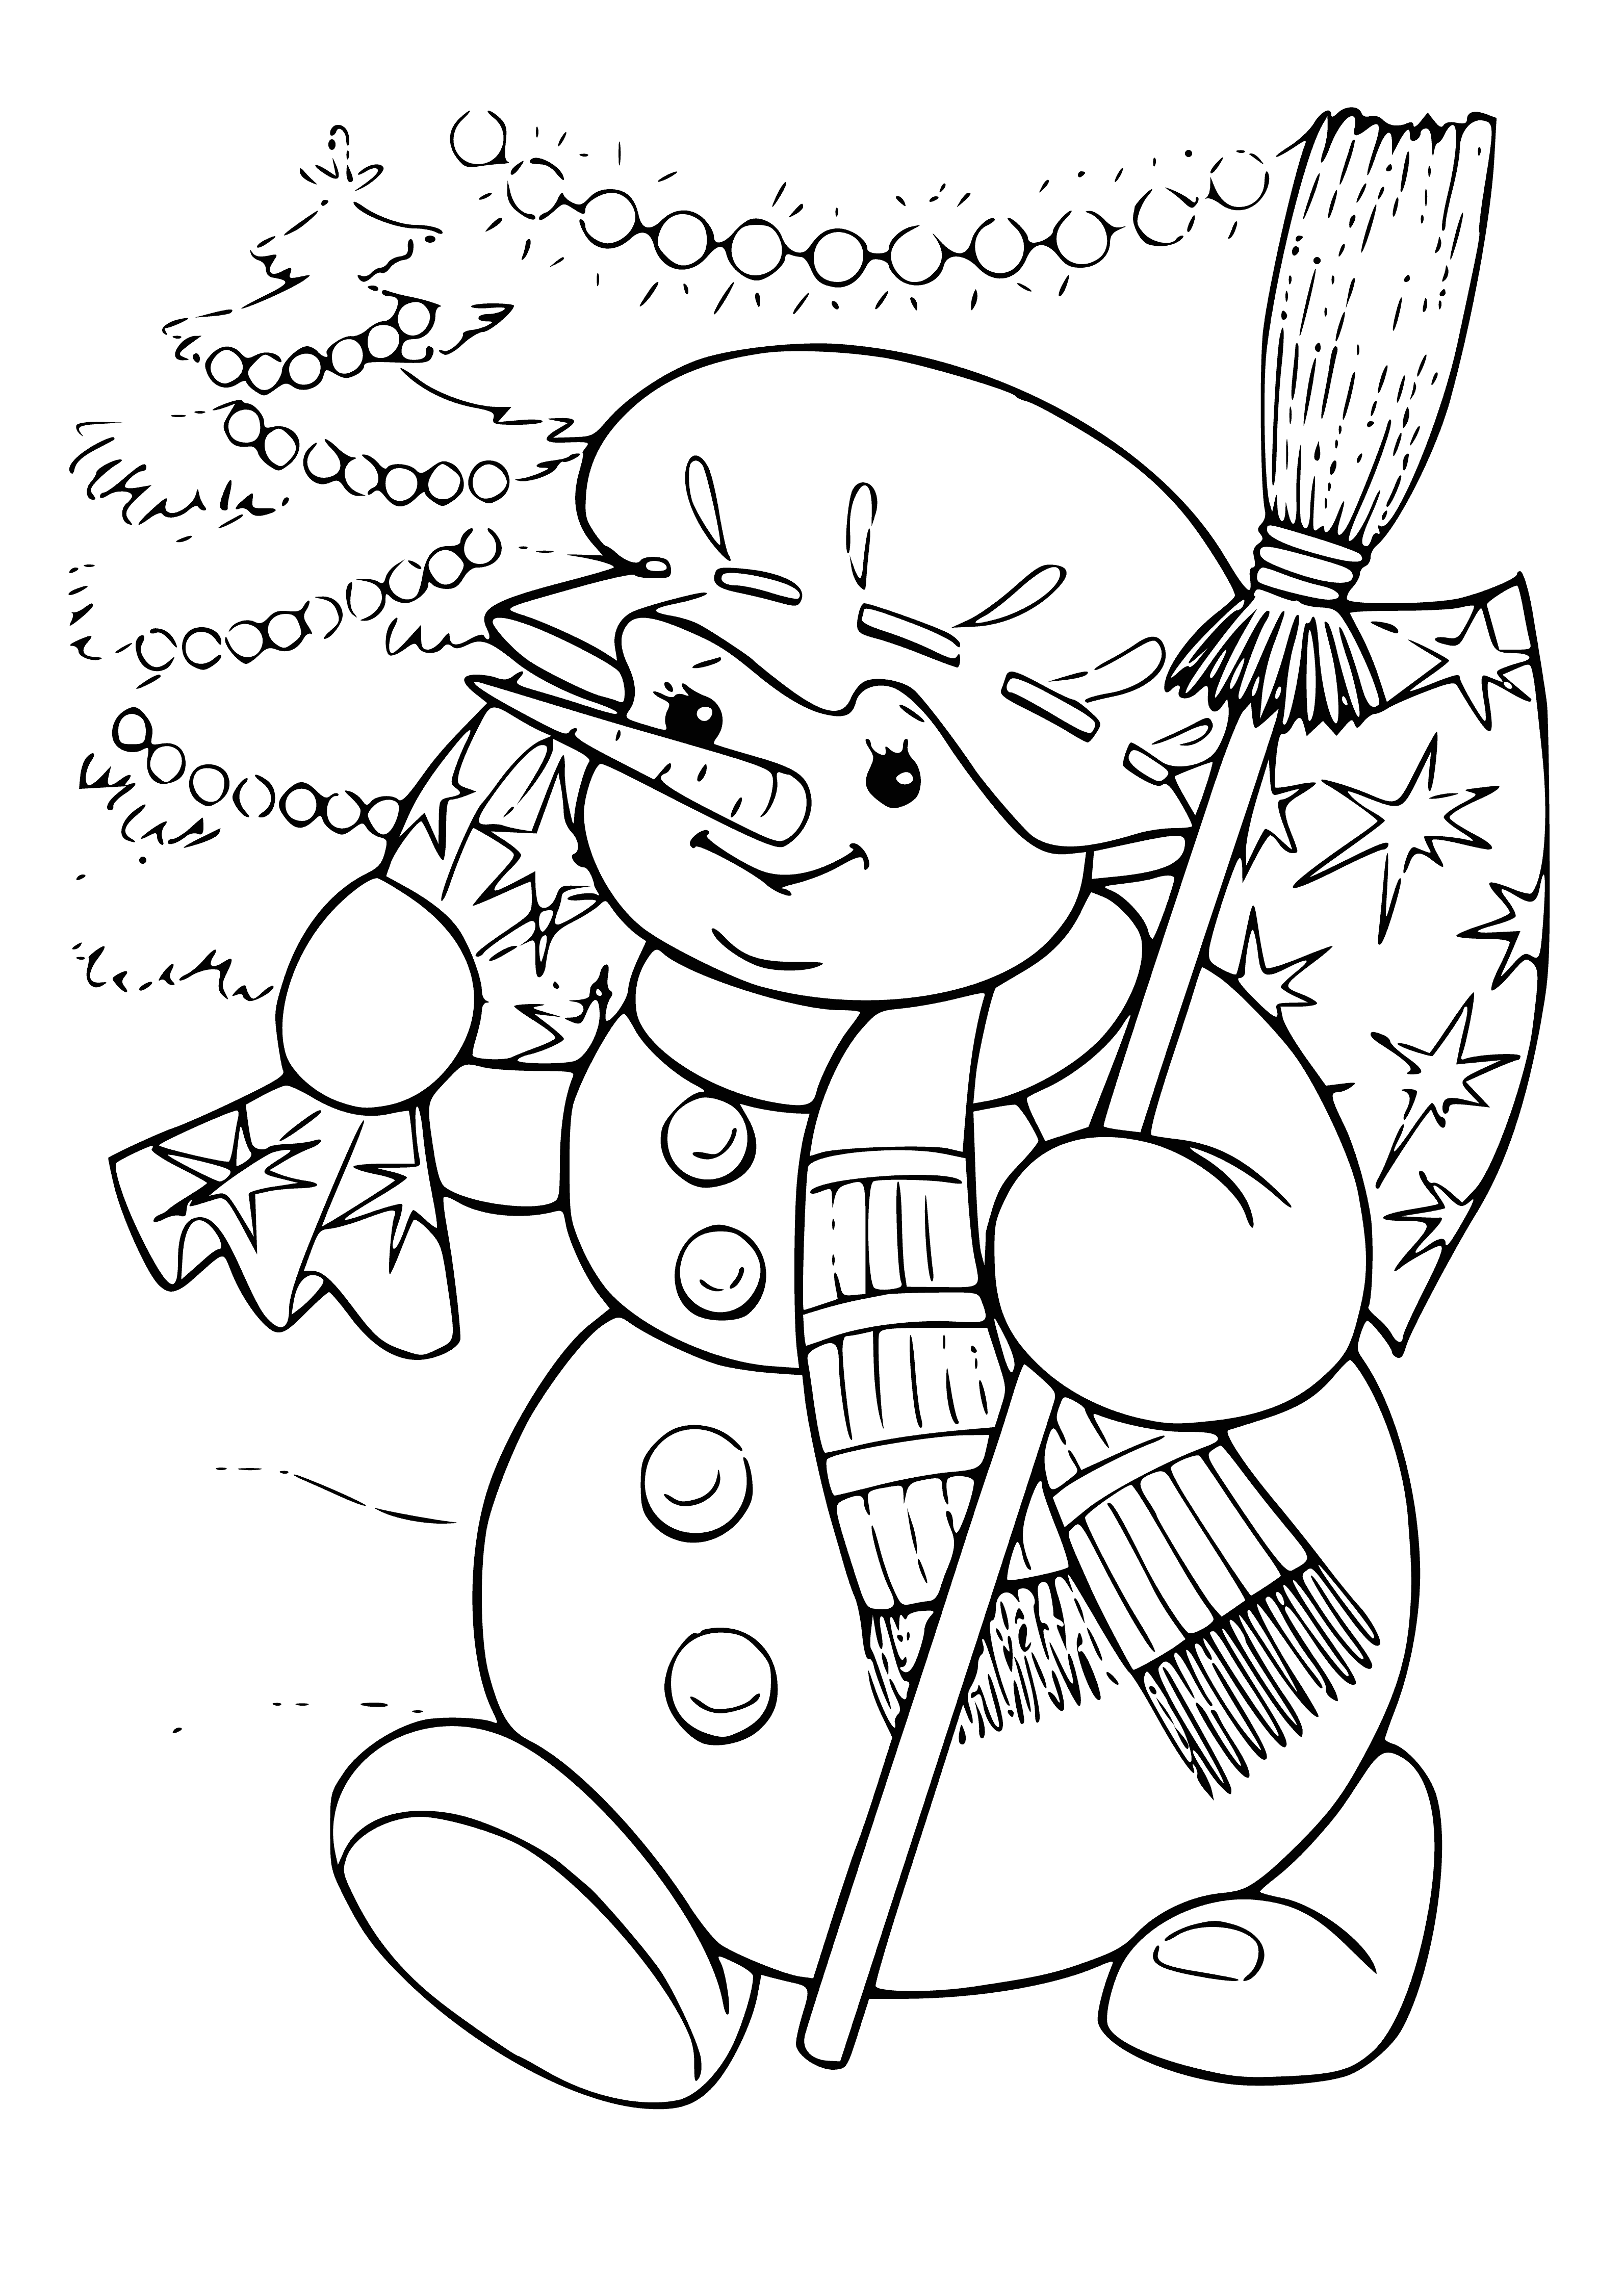 coloring page: A snowman carrying gifts is walking across a field, wearing a hat and with a bag of gifts over its shoulder.